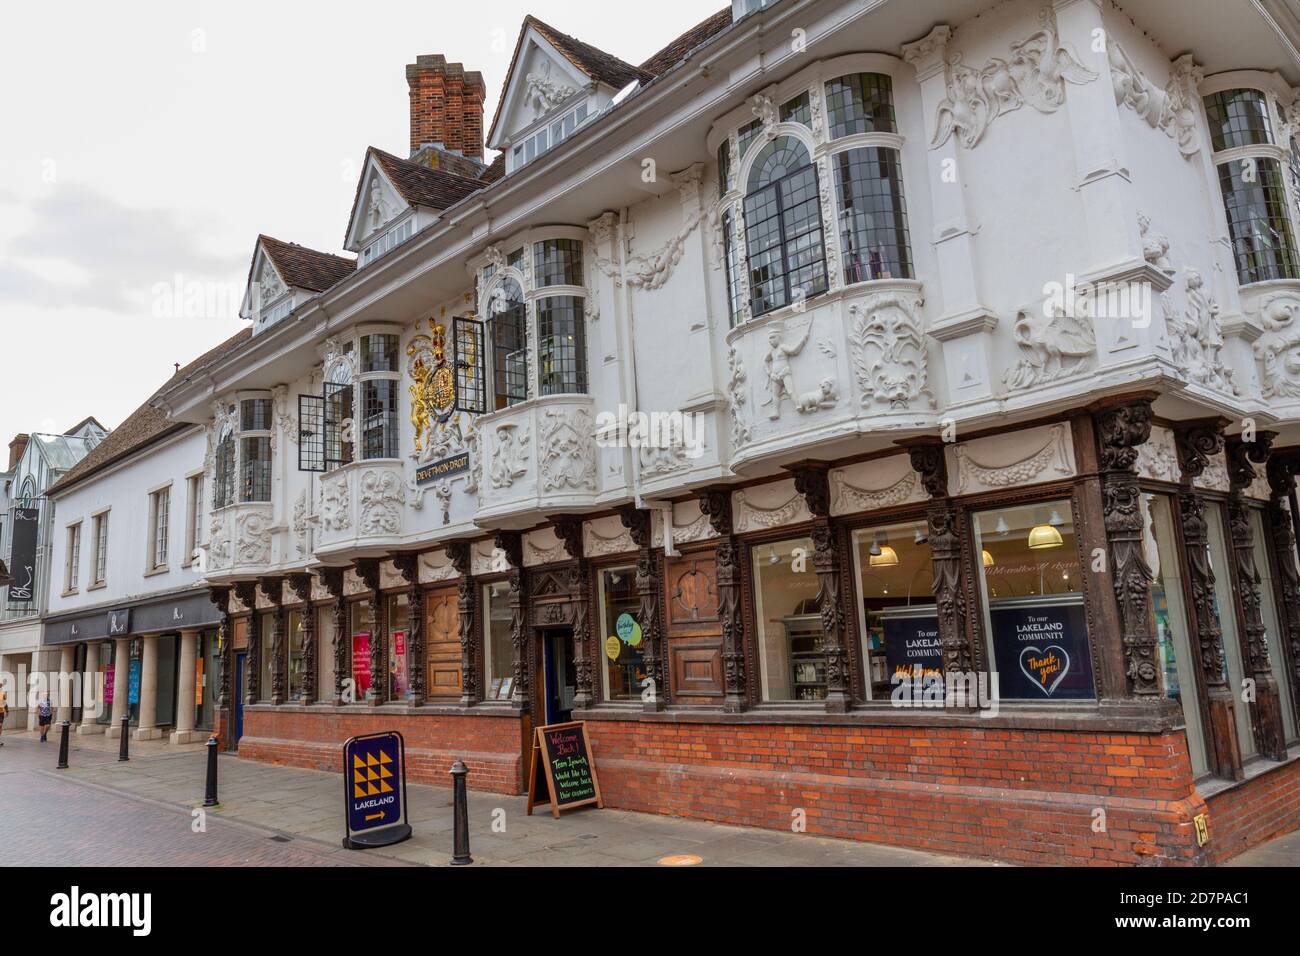 The Ancient House, (also known as Sparrowe's House), a Grade I listed building on Buttermarket, Ipswich, Suffolk, UK. Stock Photo